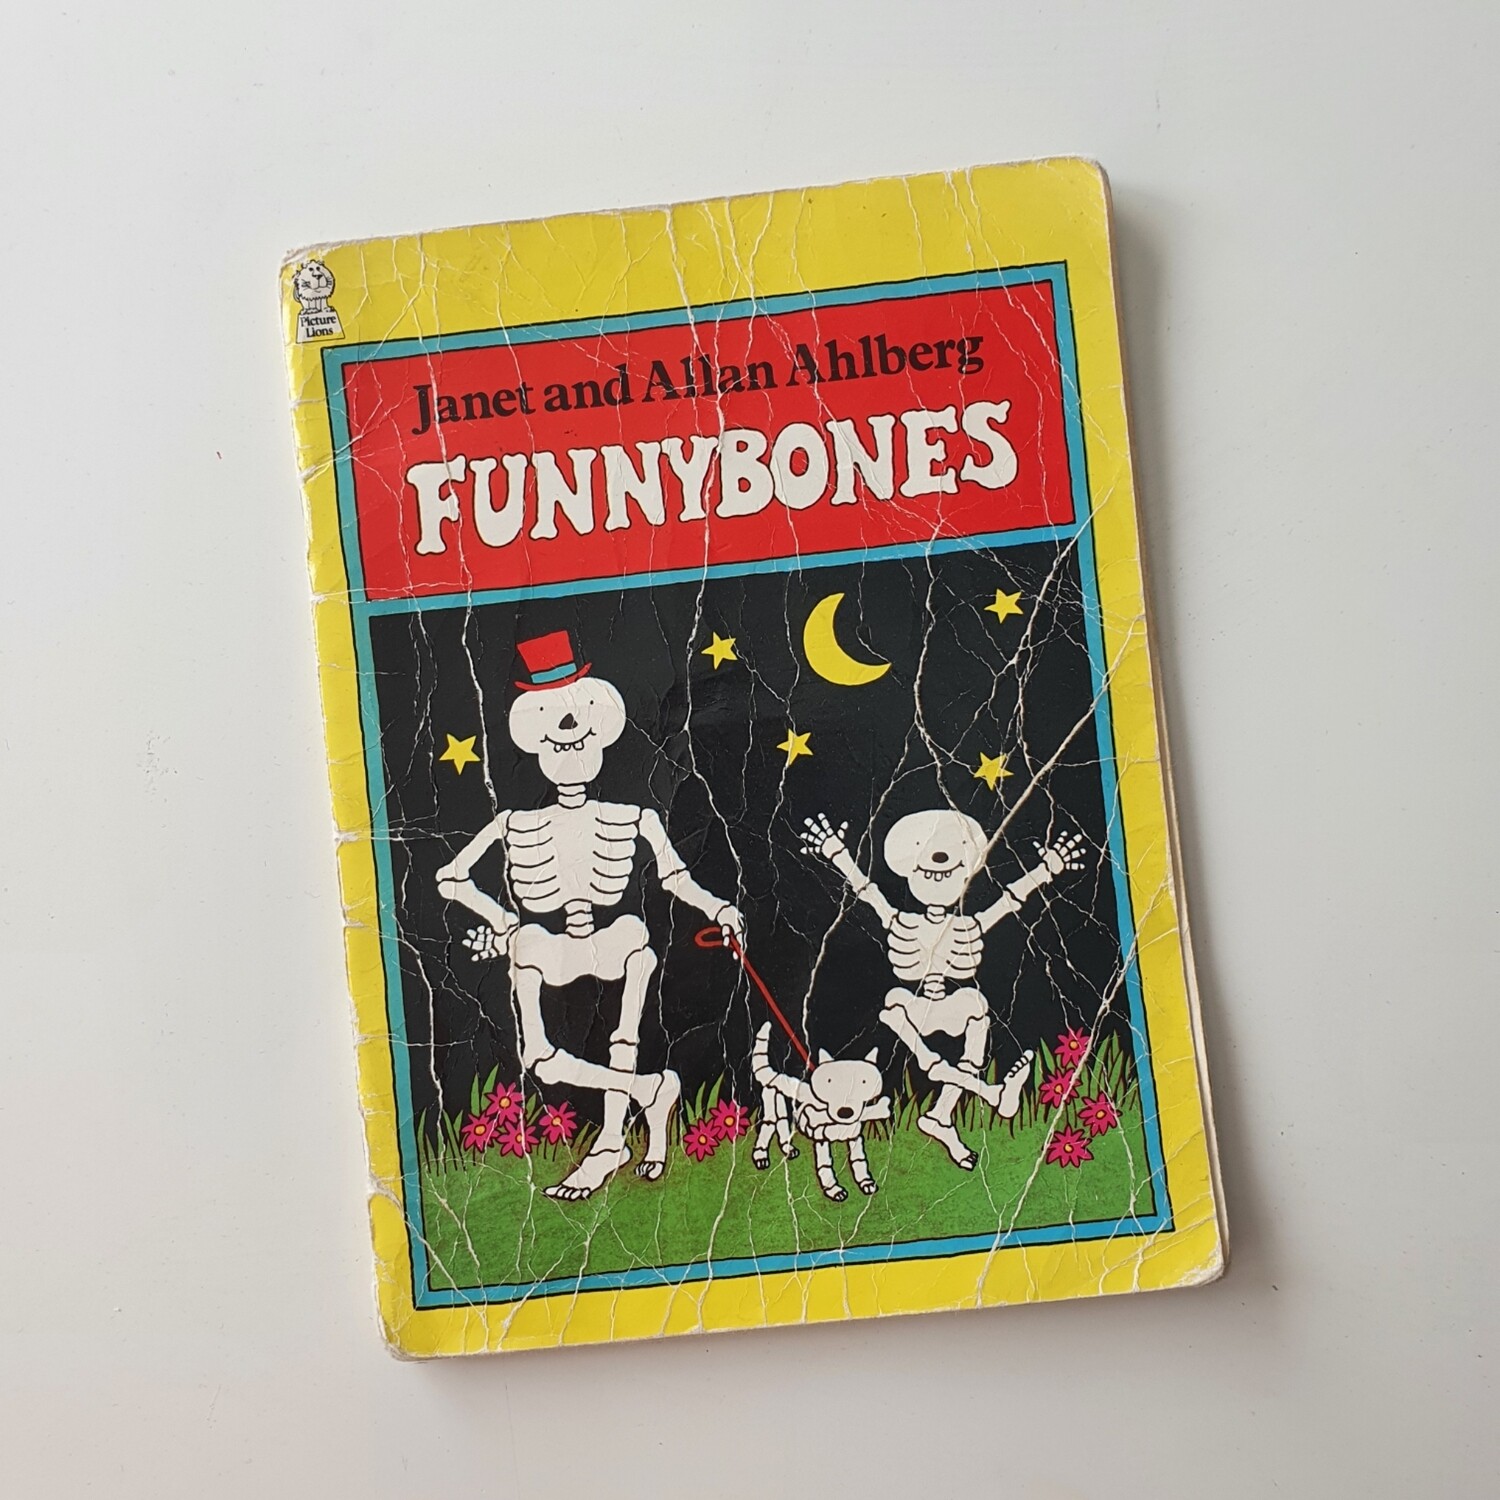 Funnybones Notebook - made from a paperback book